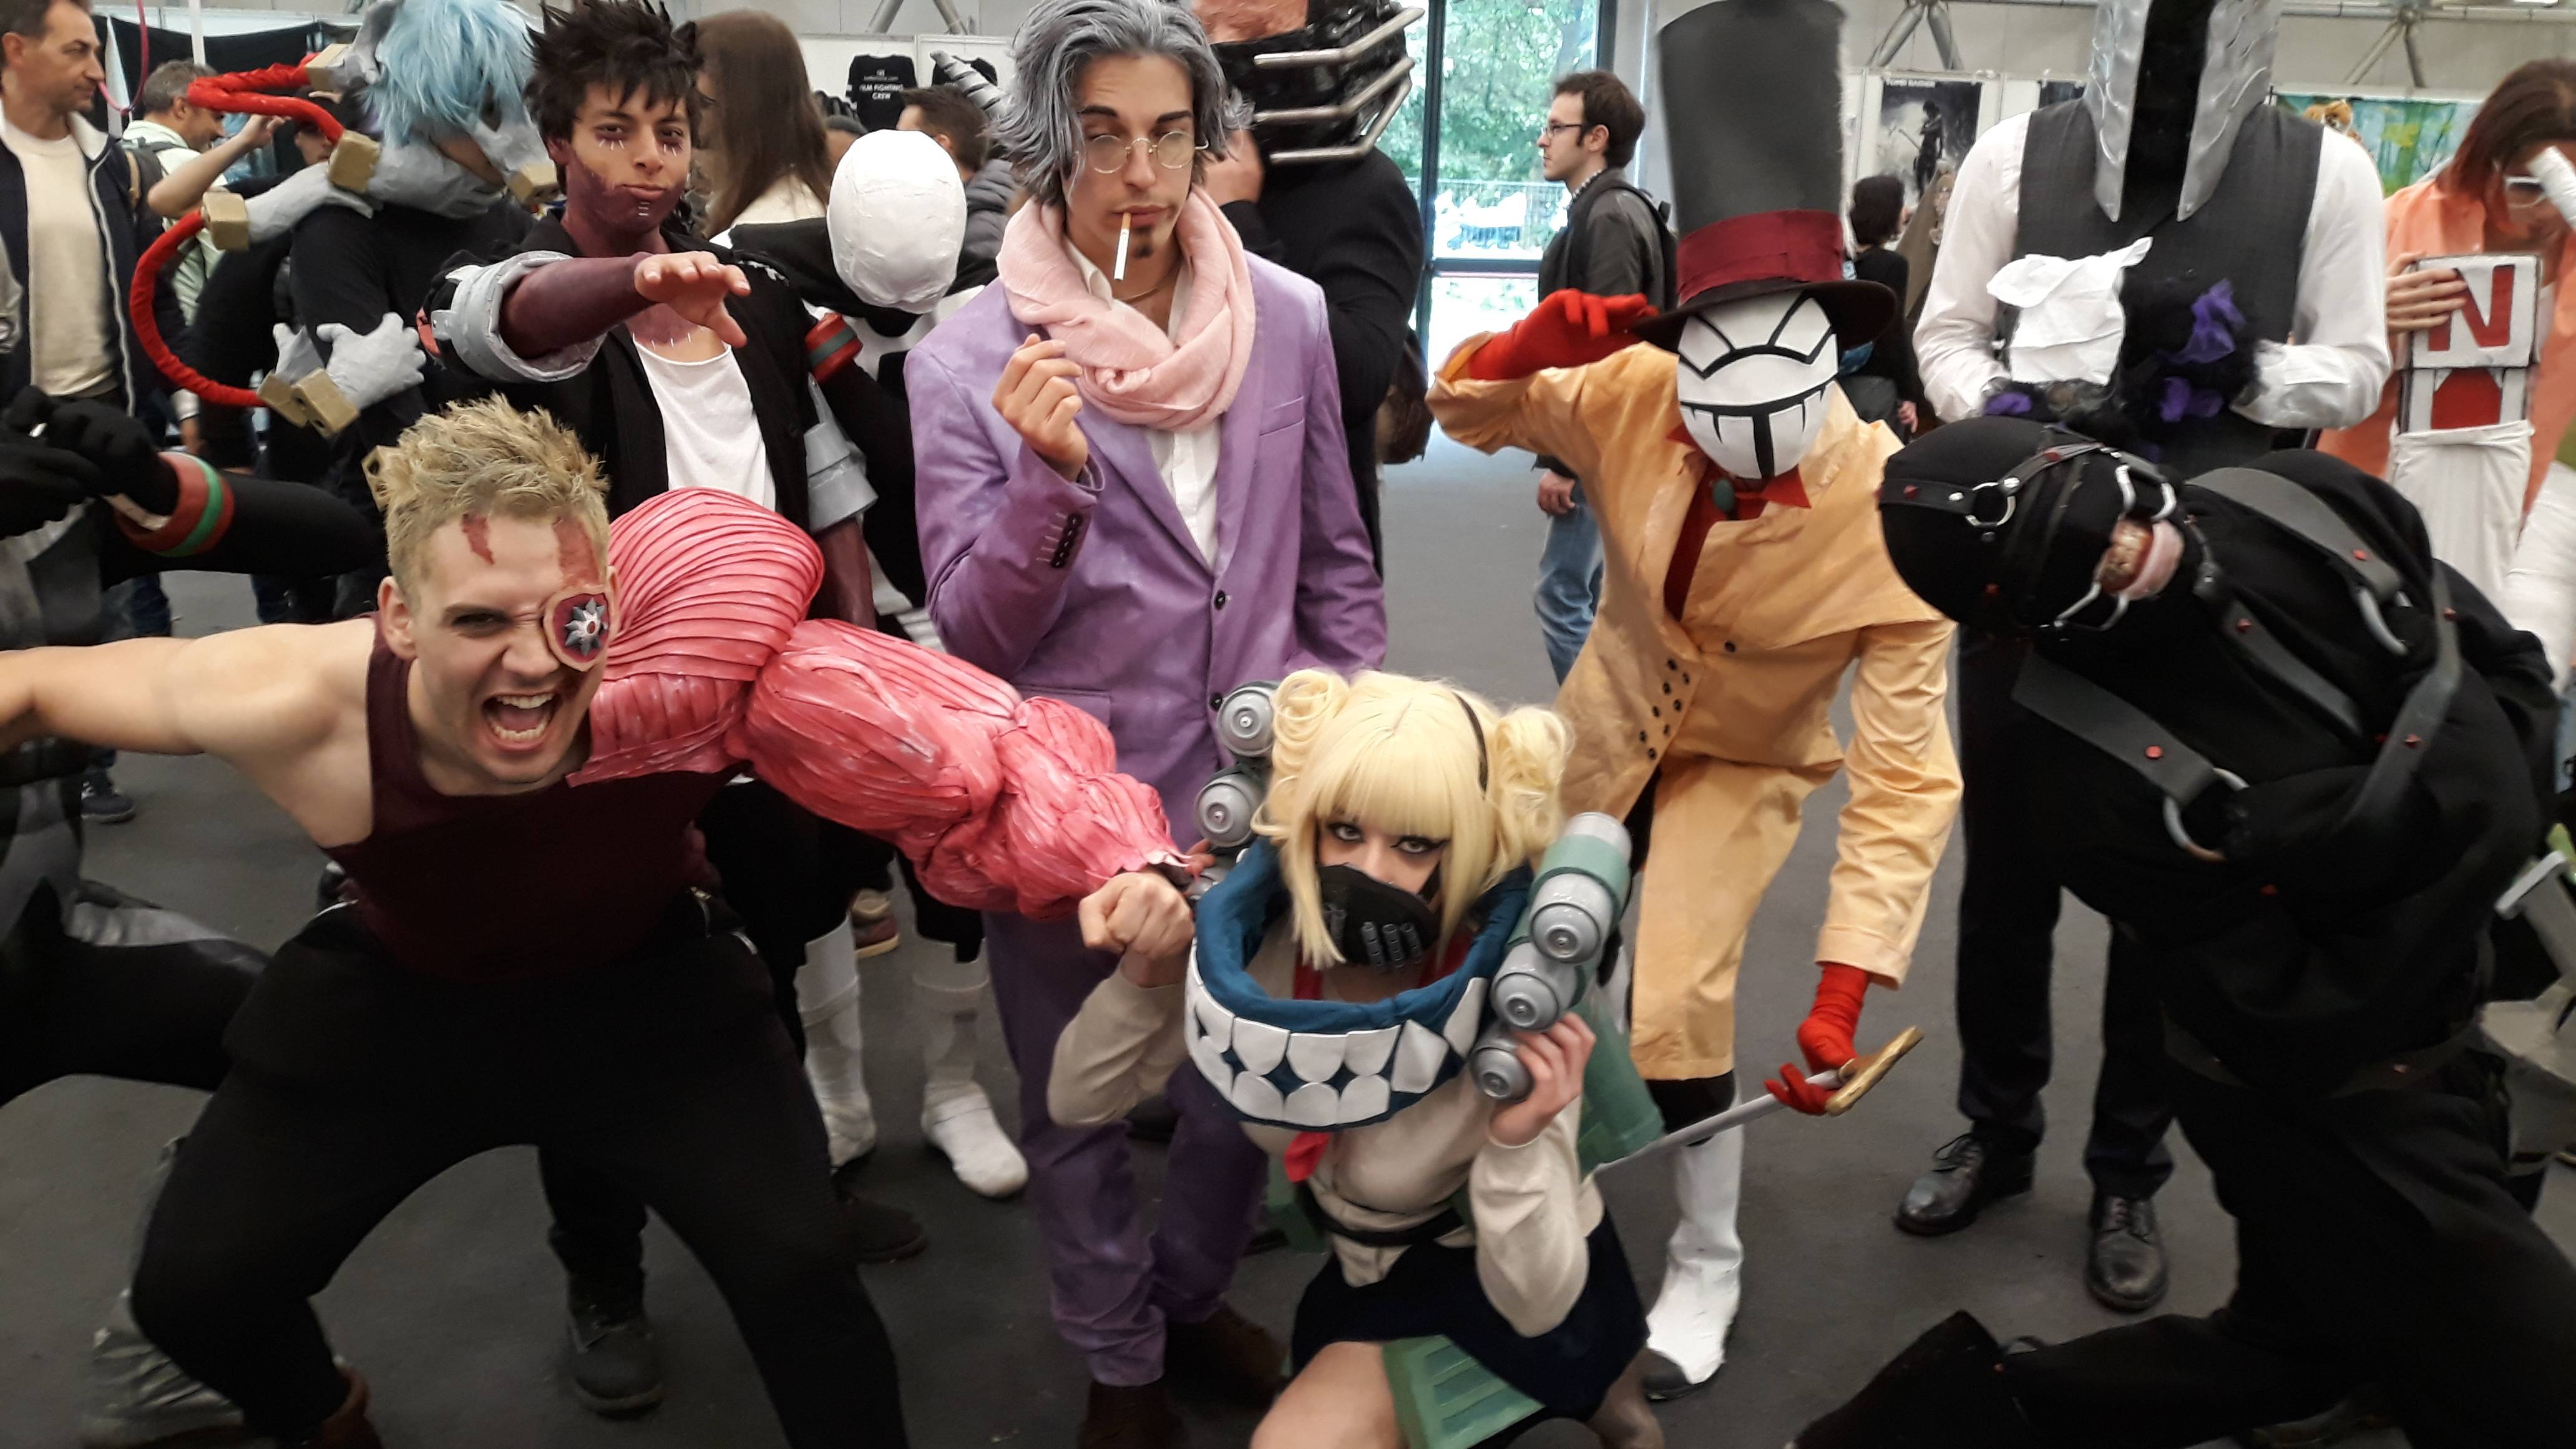 League of Villains cosplay group